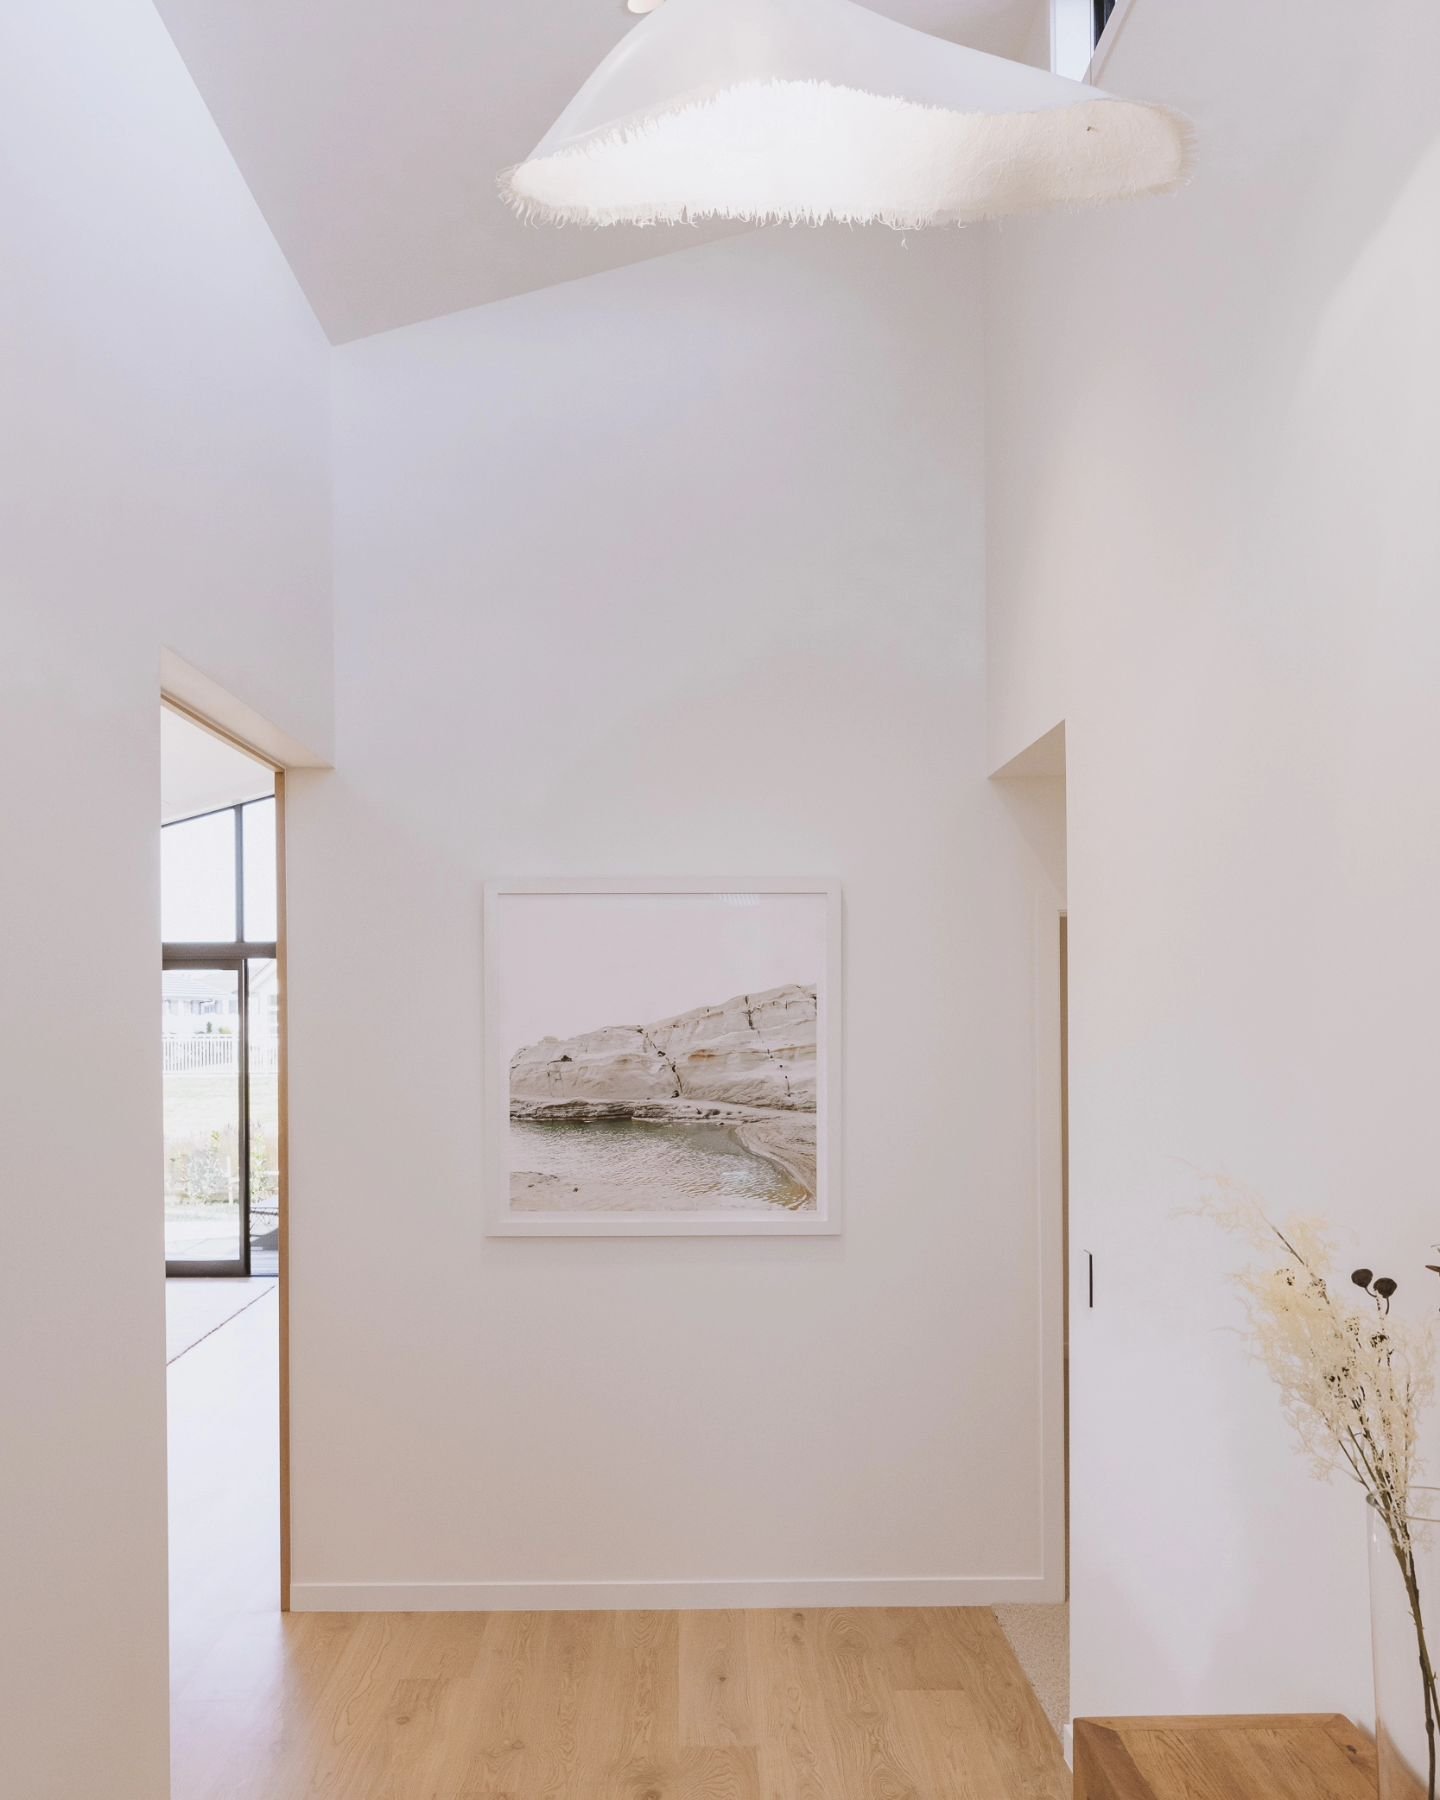 Creating a connection of rooms visually through elements of light, space, and interest at our Papamoa project.

📸 @jeremeaubertin 
Construction by @collier_construction_ltd_nz 

#spaceplanning #interiorarchitecture #texture #organicmaterials #entran